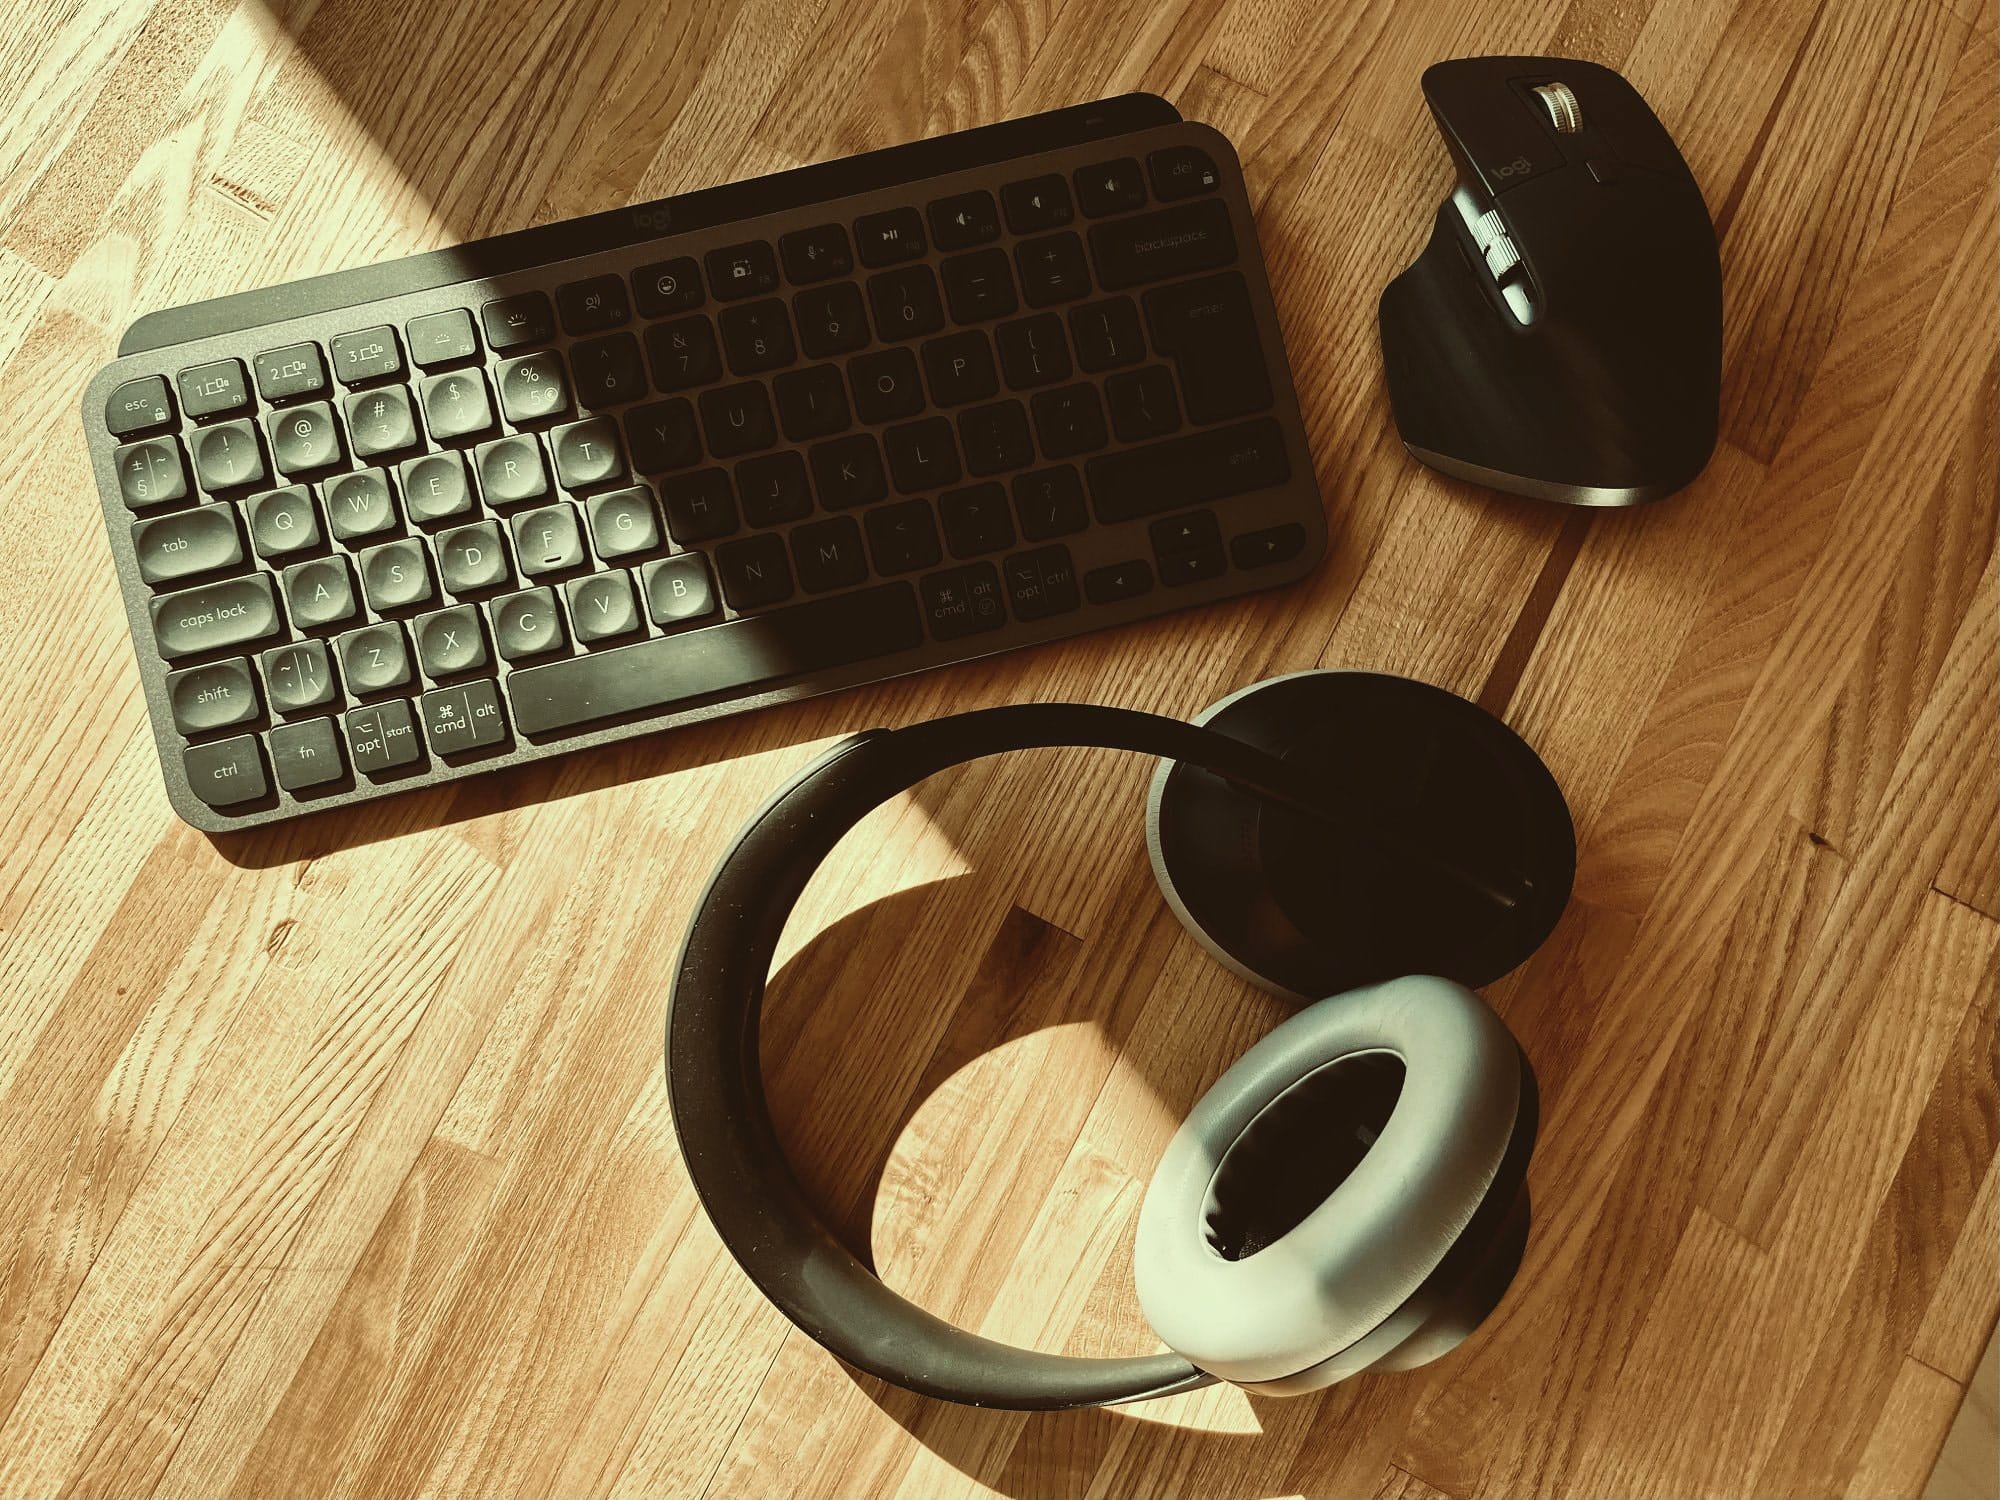 A keyboard, mouse, and headphones on a wooden desk in sunlight